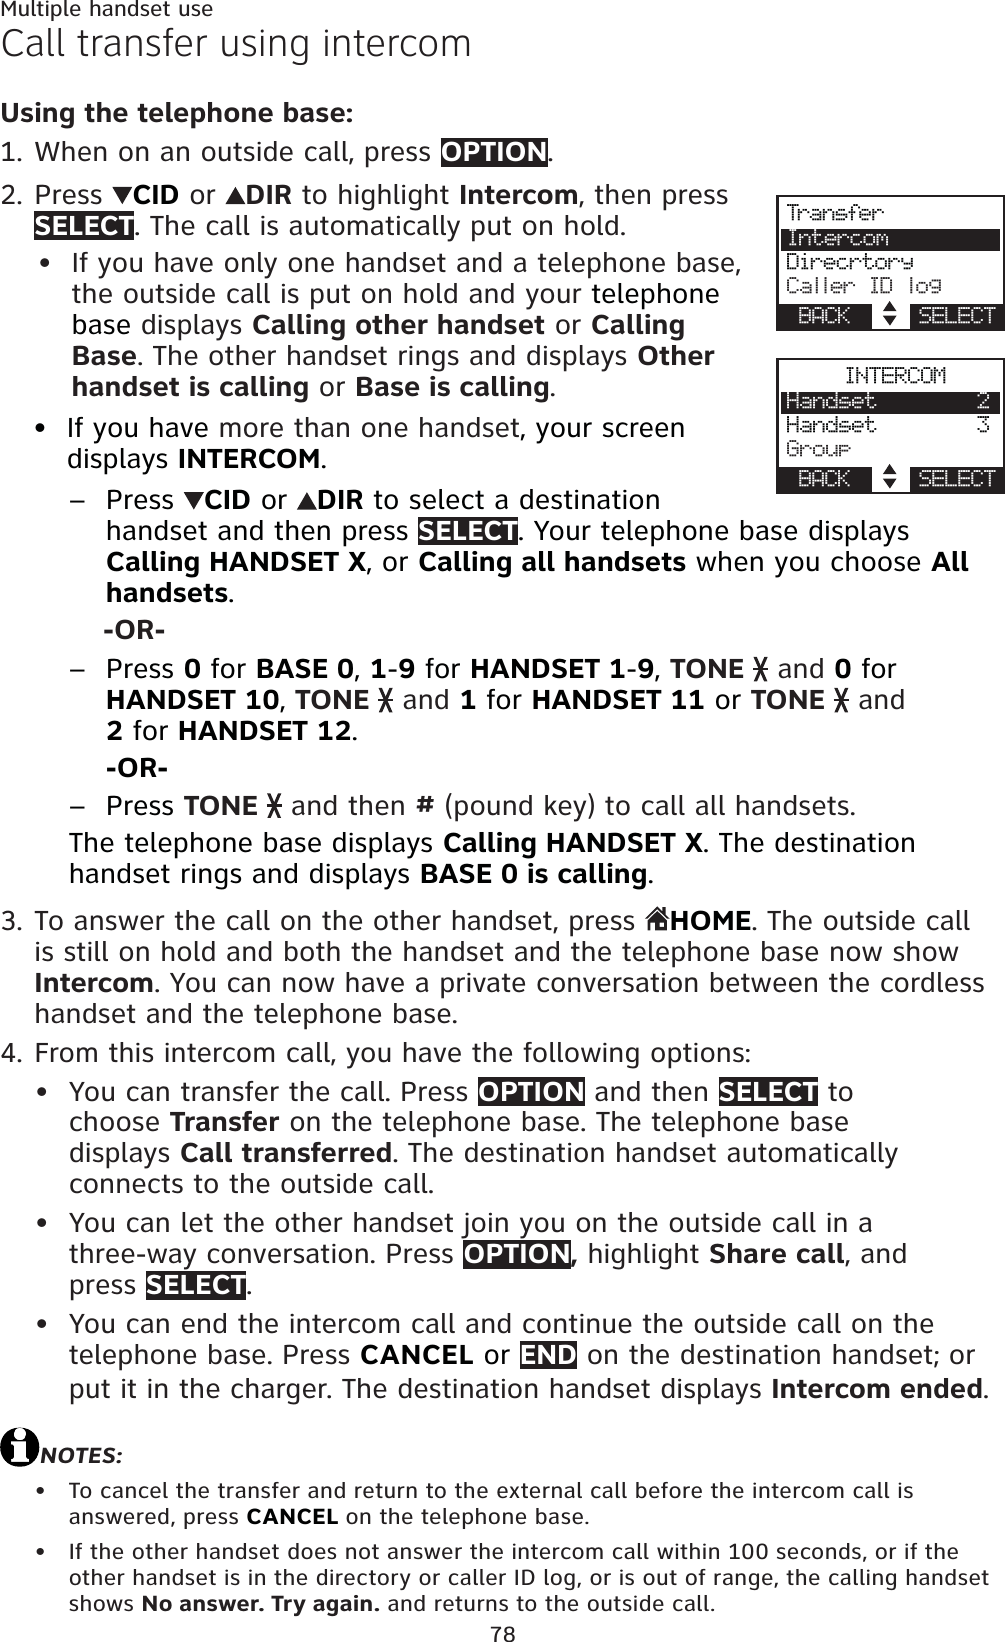 78Multiple handset useCall transfer using intercomUsing the telephone base:When on an outside call, press OPTION.Press CID or  DIR to highlight Intercom, then press SELECT. The call is automatically put on hold.If you have only one handset and a telephone base,the outside call is put on hold and your telephone base displays Calling other handset or CallingBase. The other handset rings and displays Otherhandset is calling or Base is calling.If you have more than one handset, your screen displays INTERCOM.Press  CID or  DIR to select a destination handset and then press SELECT. Your telephone base displays Calling HANDSET X, or Calling all handsets when you choose Allhandsets.-OR-Press 0 for BASE 0,1-9 for HANDSET 1-9,TONE   and 0 for HANDSET 10,TONE   and 1 for HANDSET 11 or TONE   and 2 for HANDSET 12.-OR-Press TONE   and then # (pound key) to call all handsets.The telephone base displays Calling HANDSET X. The destination handset rings and displays BASE 0 is calling.To answer the call on the other handset, press HOME. The outside call is still on hold and both the handset and the telephone base now show Intercom. You can now have a private conversation between the cordless handset and the telephone base.From this intercom call, you have the following options: You can transfer the call. Press OPTION and then SELECT to choose Transfer on the telephone base. The telephone base displays Call transferred. The destination handset automatically connects to the outside call.You can let the other handset join you on the outside call in a three-way conversation. Press OPTION, highlight Share call, and press SELECT.You can end the intercom call and continue the outside call on the telephone base. Press CANCEL or END on the destination handset; or put it in the charger. The destination handset displays Intercom ended.NOTES:To cancel the transfer and return to the external call before the intercom call is answered, press CANCEL on the telephone base.If the other handset does not answer the intercom call within 100 seconds, or if the other handset is in the directory or caller ID log, or is out of range, the calling handset shows No answer. Try again. and returns to the outside call.1.2.••–––3.4.•••••INTERCOMHandset        2Handset        3GroupBACK    SELECTTra n sferIntercomDirecrtoryCaller ID logBACK    SELECT